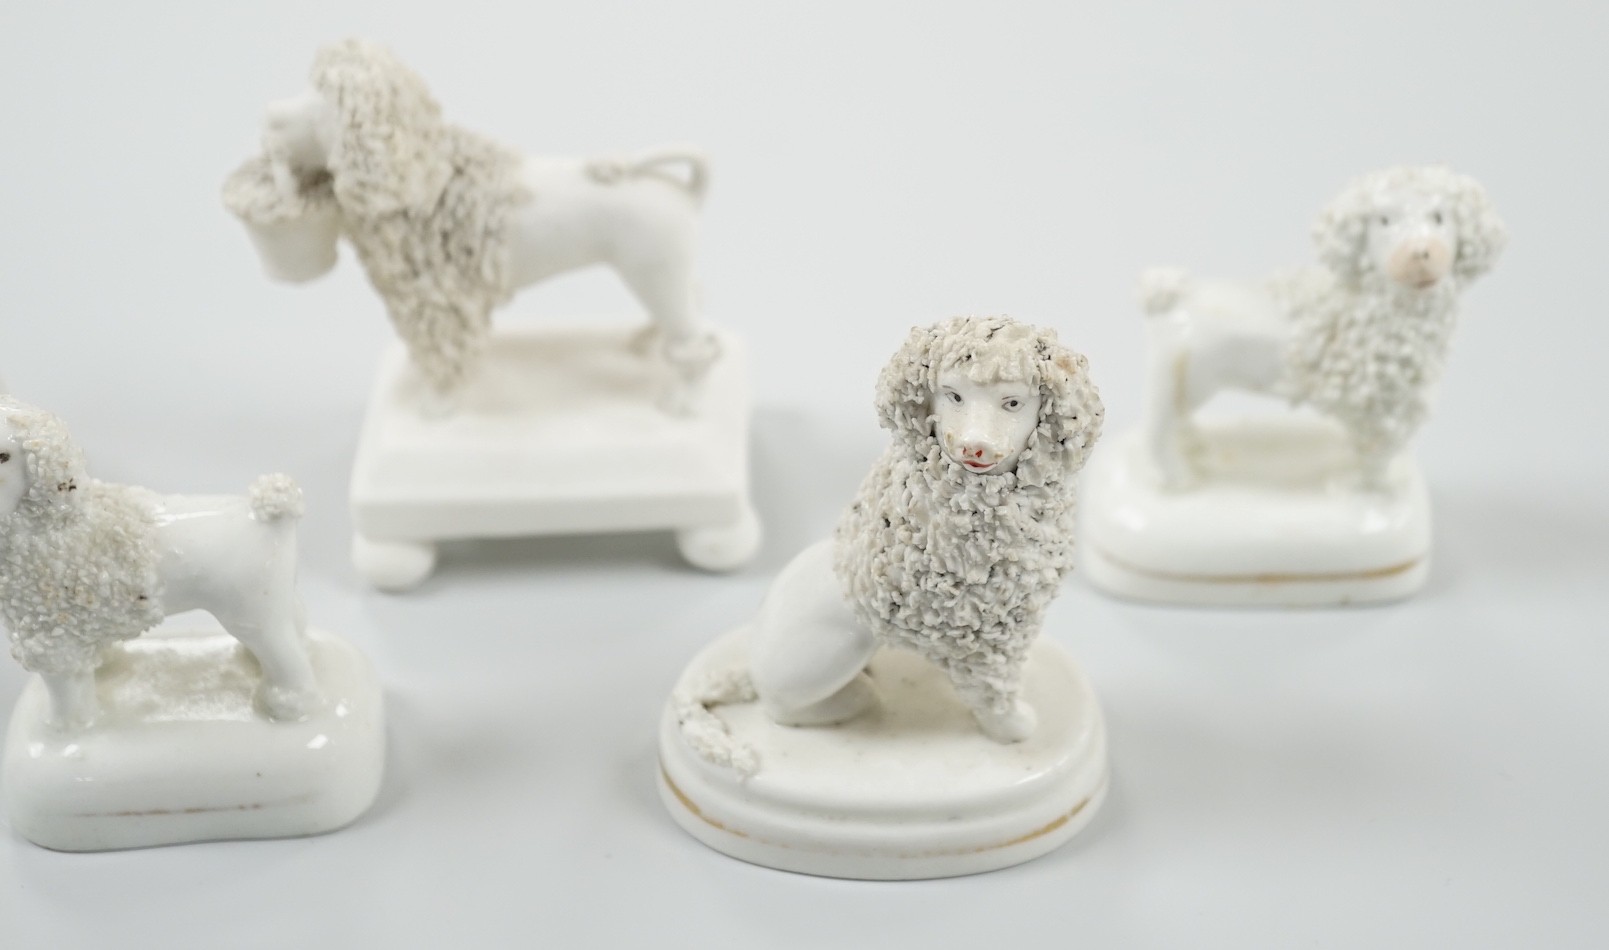 Five small Staffordshire models of poodles, together with a small poodle lying recumbent on an oval mounted base, possibly Davenport, c.1830-50, (6). Tallest 6.8cm., Provence: Dennis G. Rice collection, Cf. Dennis G.Rice